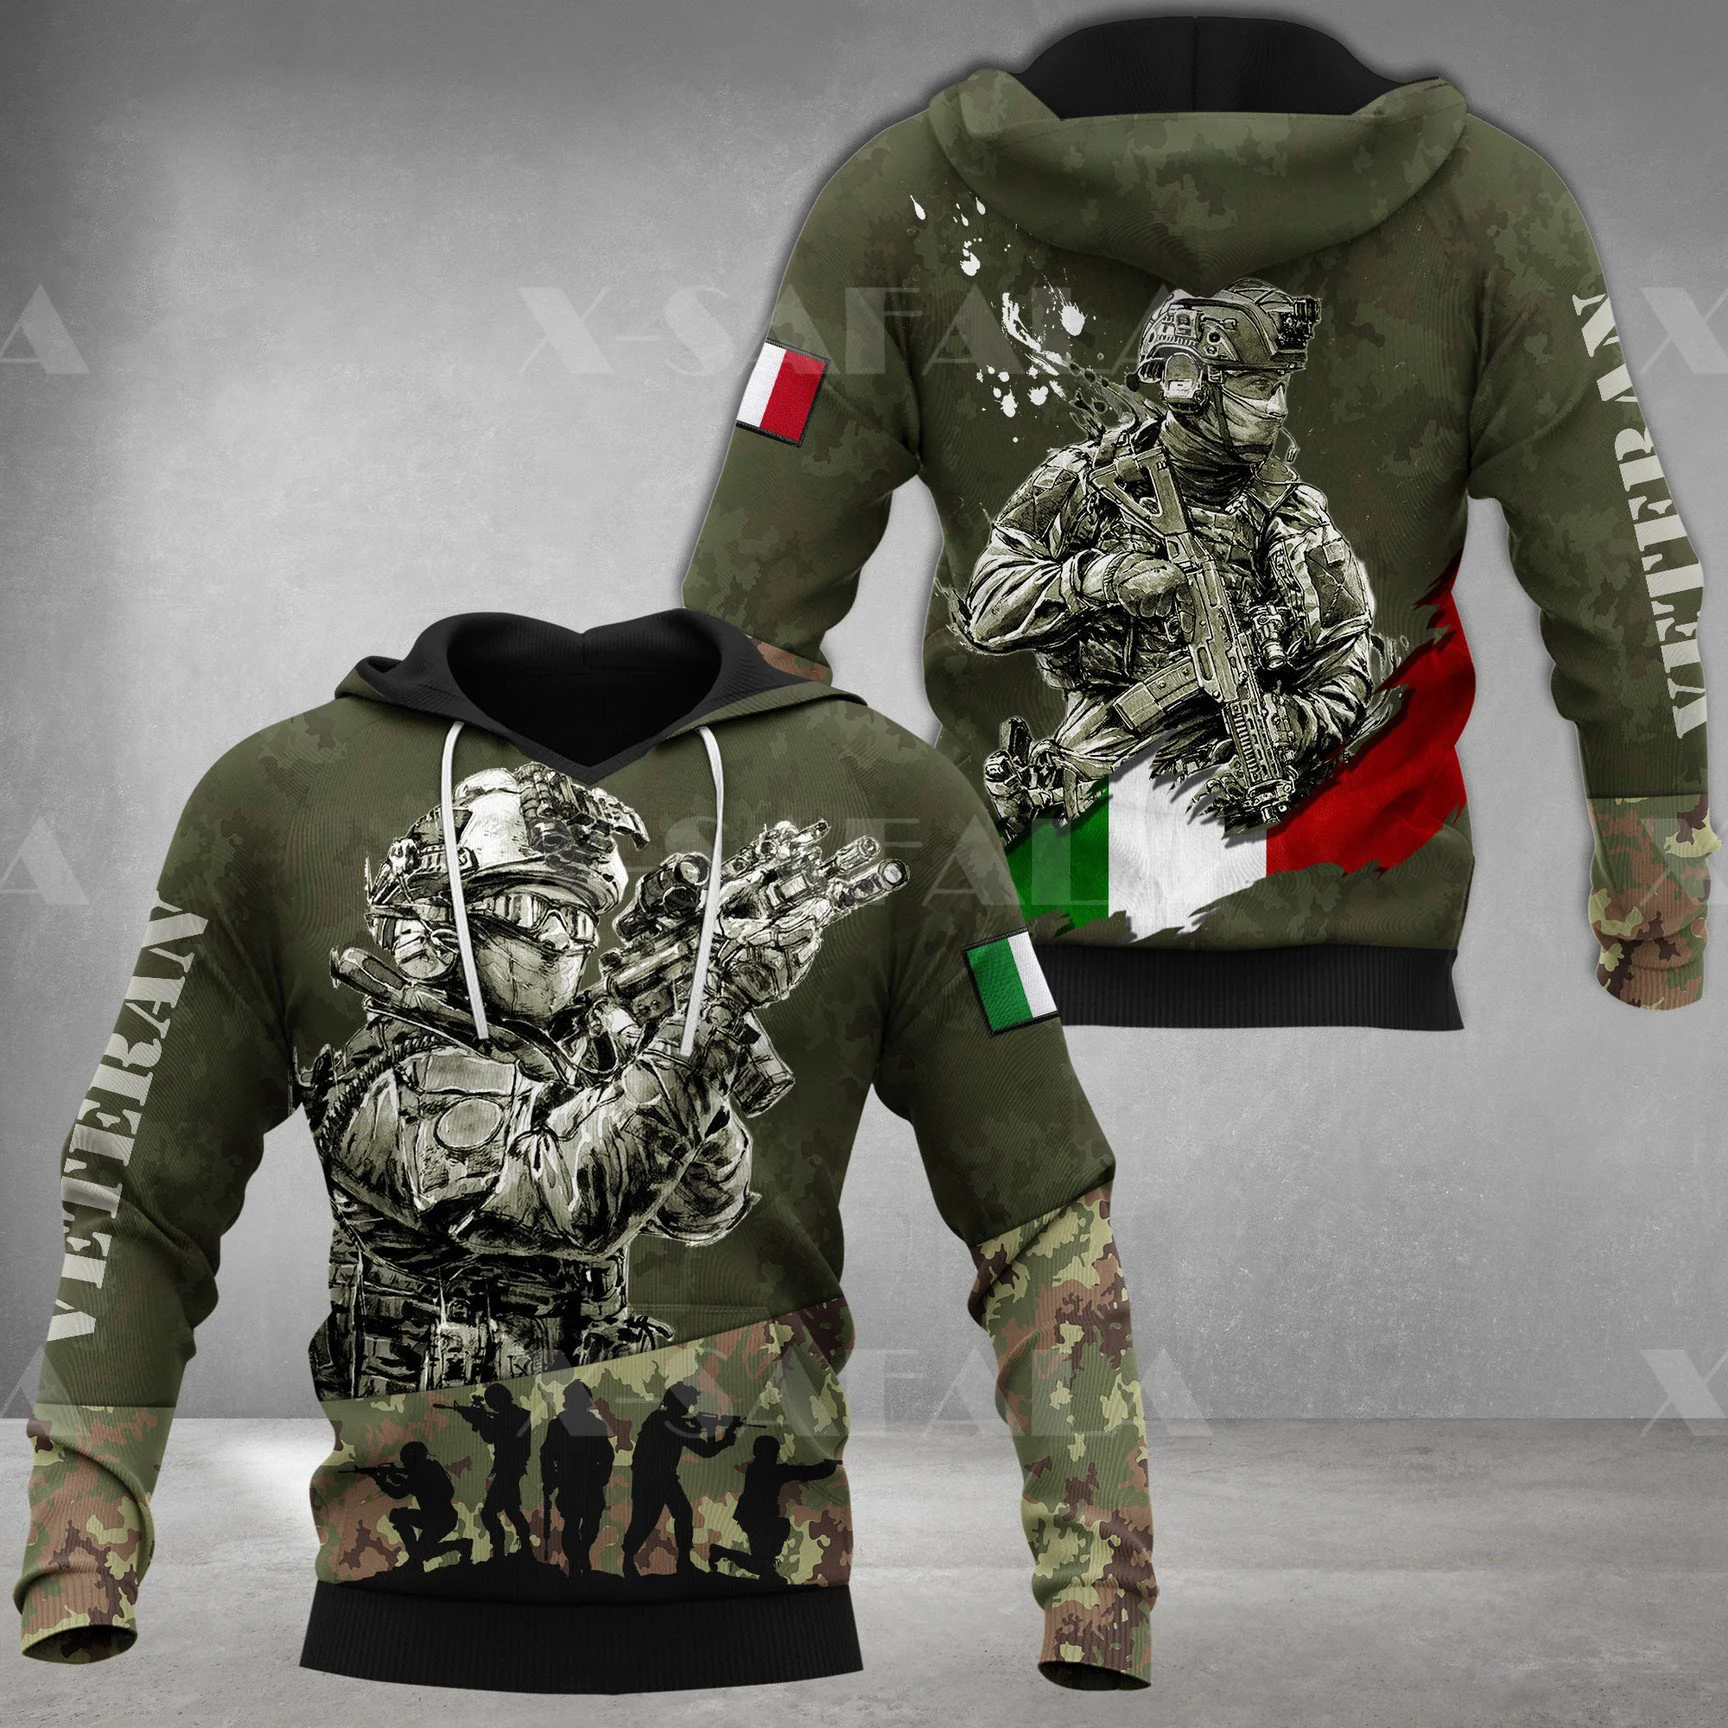 

ITALIA Soldier-ARMY-VETERAN Country 3D Print Hoodie Spring Autumn Man Women Harajuku Outwear Hooded Pullover Tracksuits Casual-5